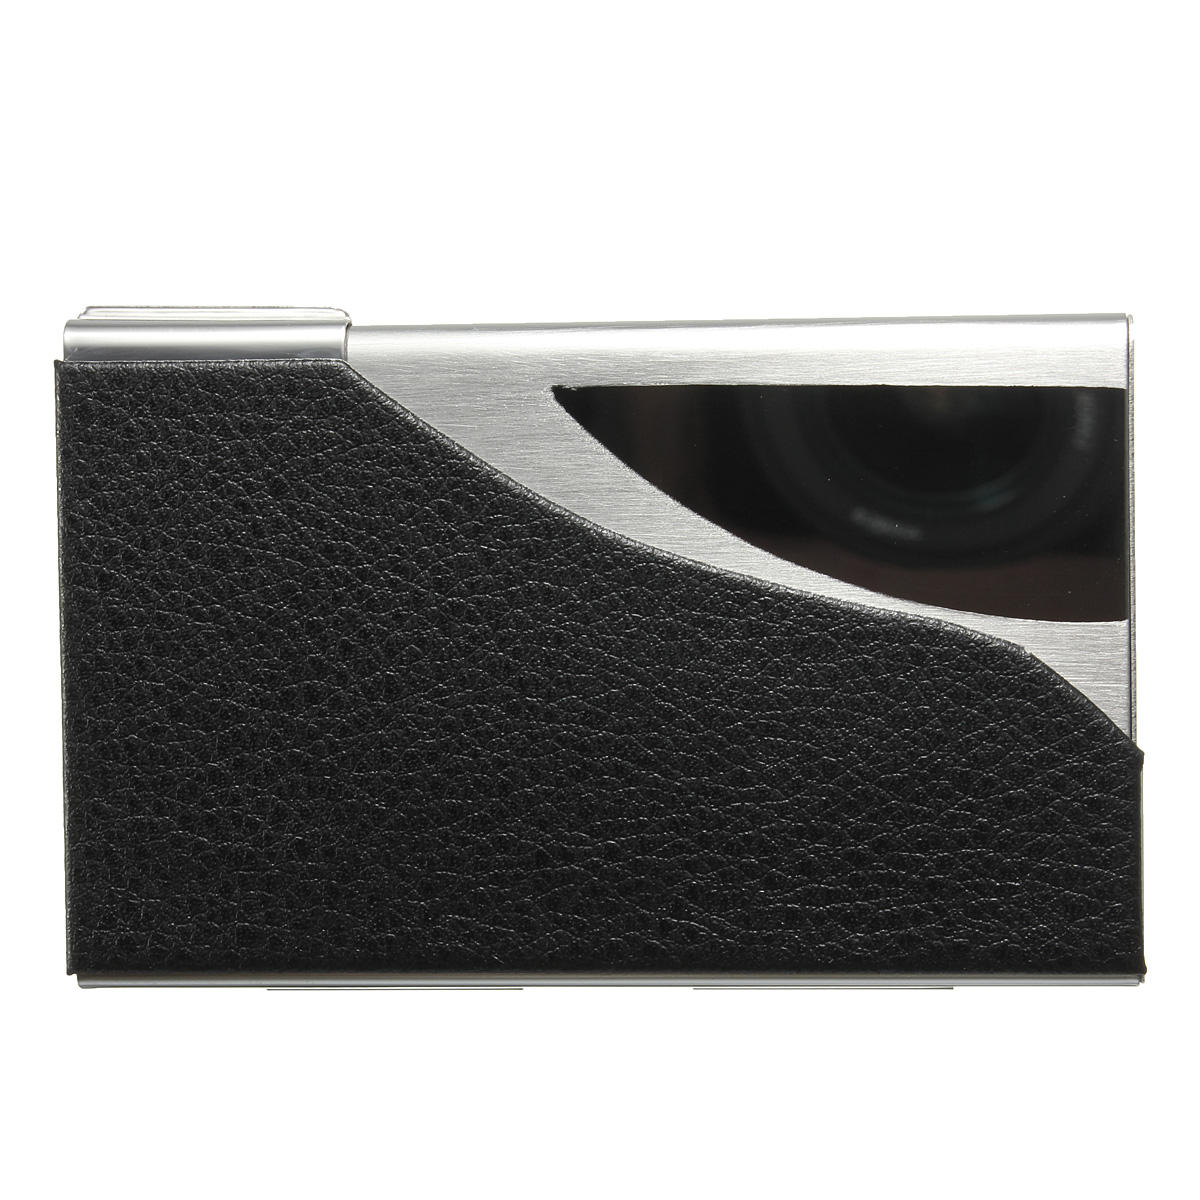 2019 New Black PU Leather&Stainless Steel Business Name Card Case Holder For Office Supplies, Banggood  - buy with discount